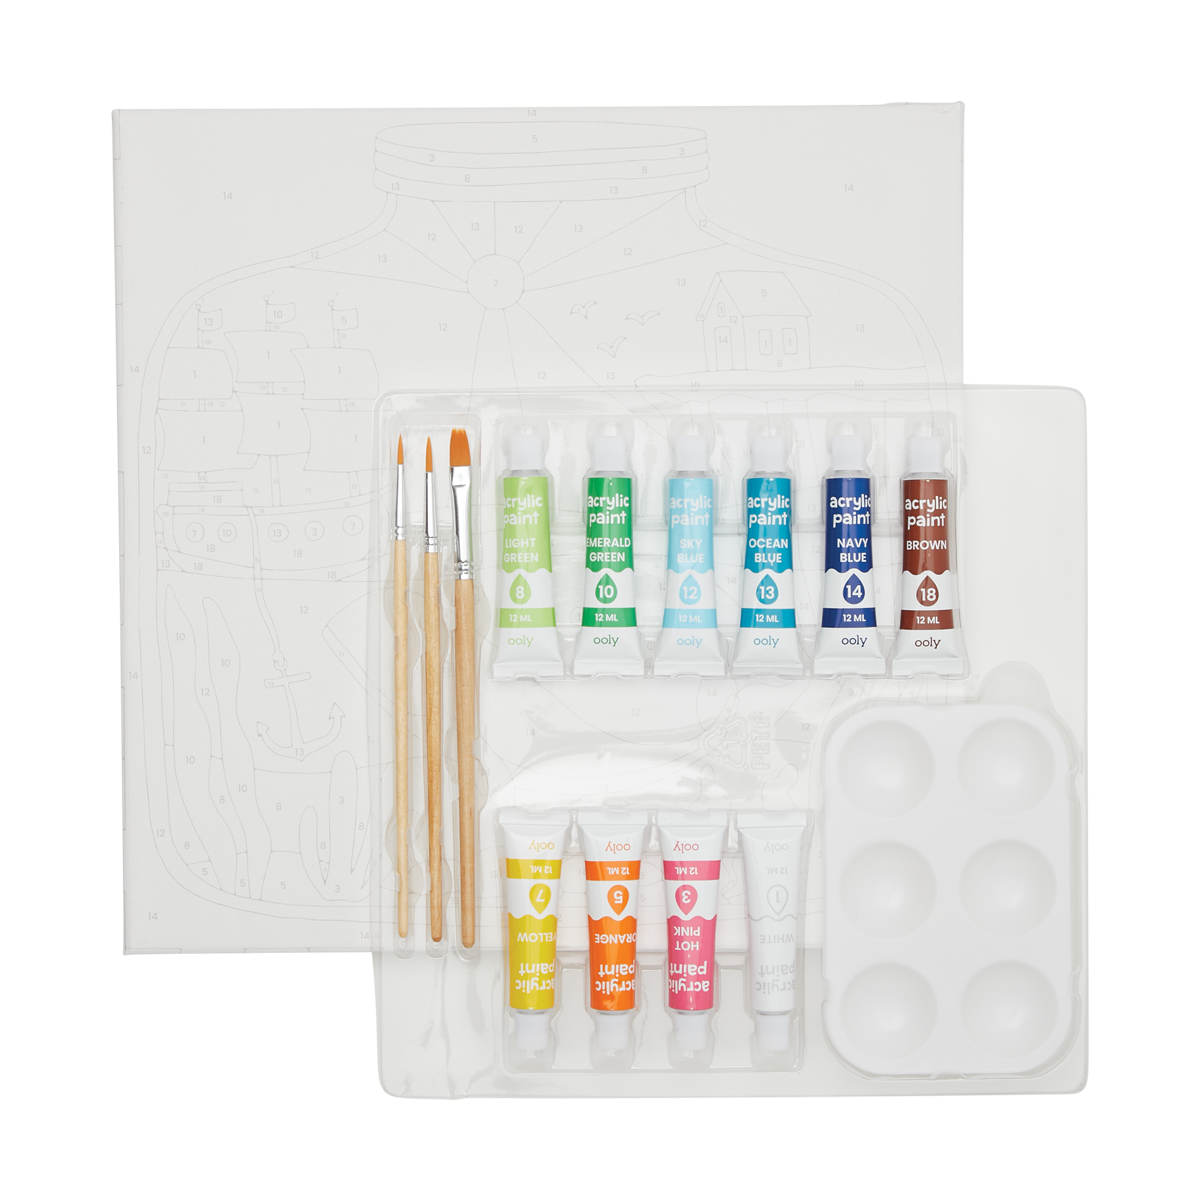 HIOLIFE hiolife 3 pack paint by number kits for kids, 8x 8 inch